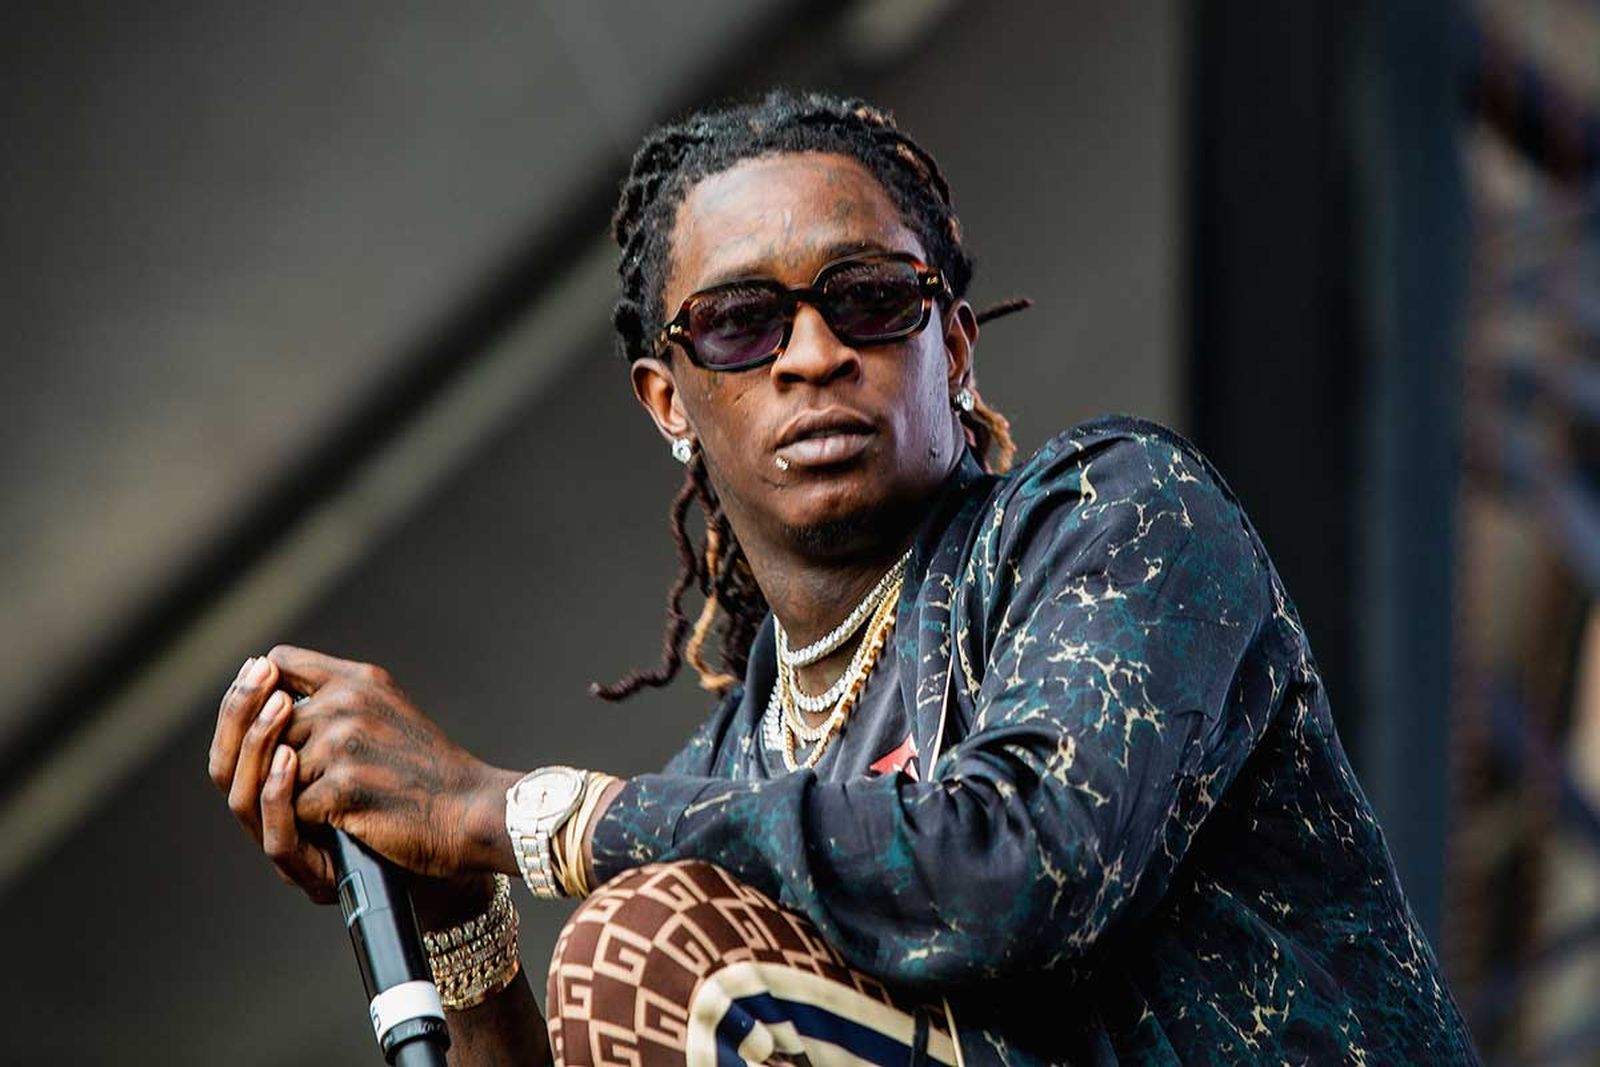 Rapper Young Thug wants to help Africans leave Ukraine